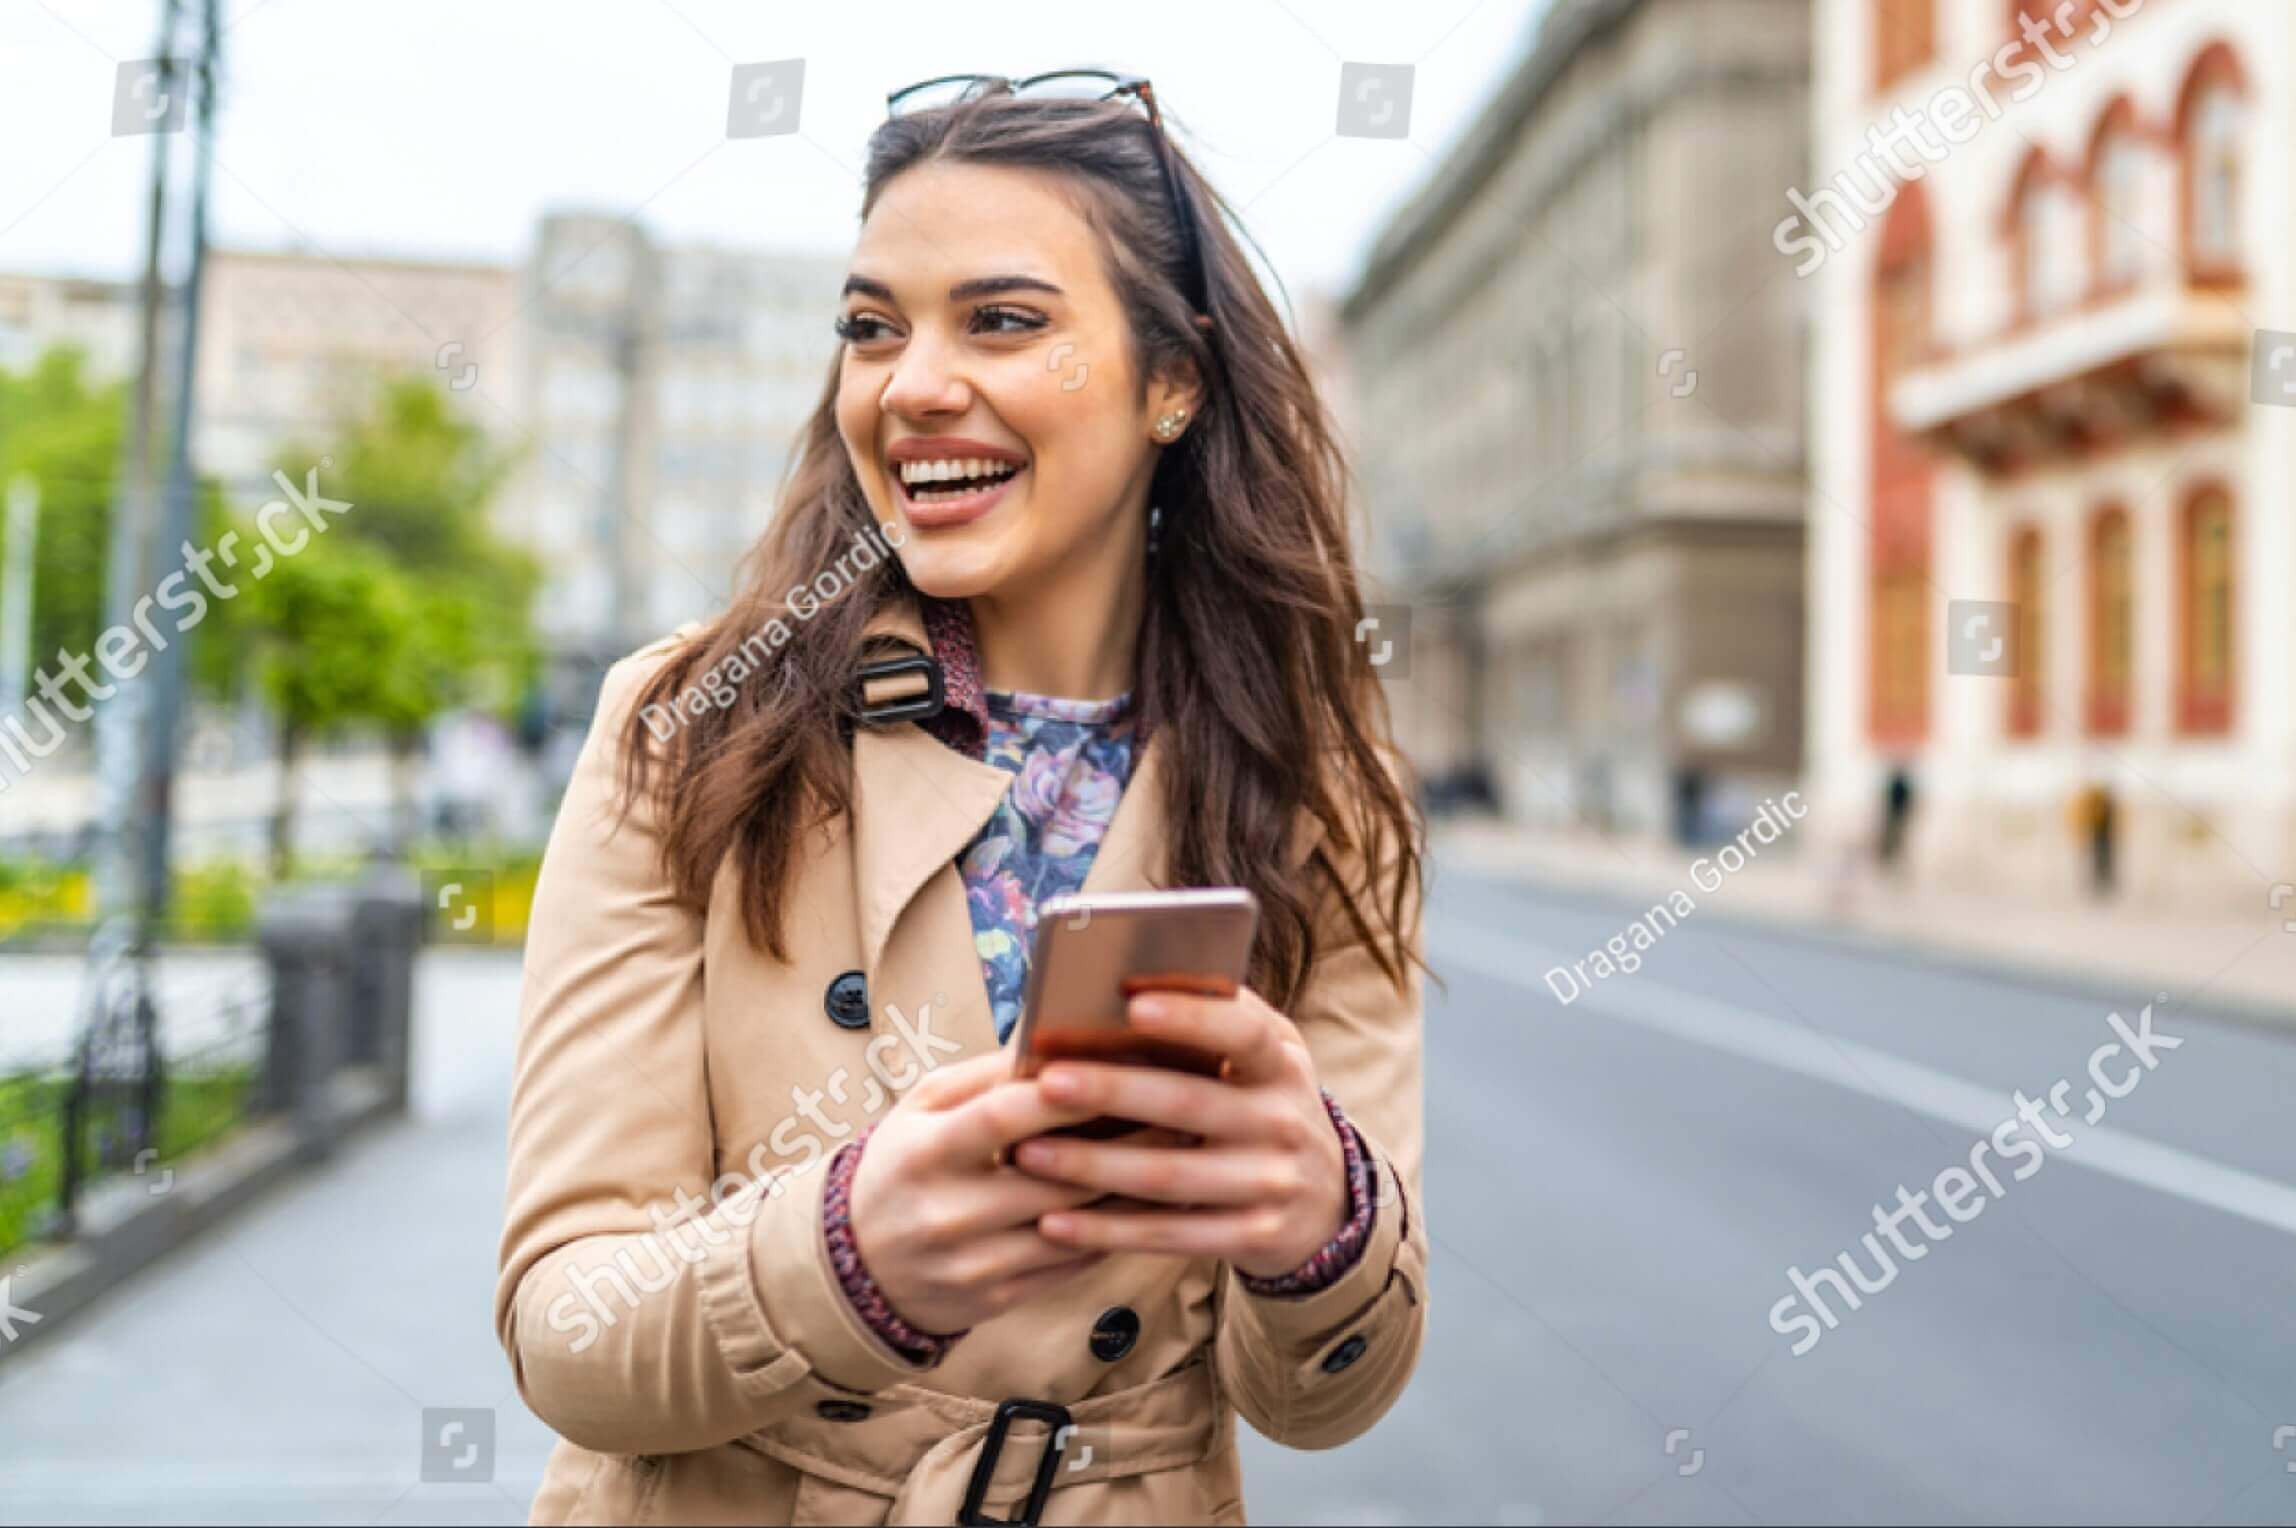 Woman Smiling With Her Phone